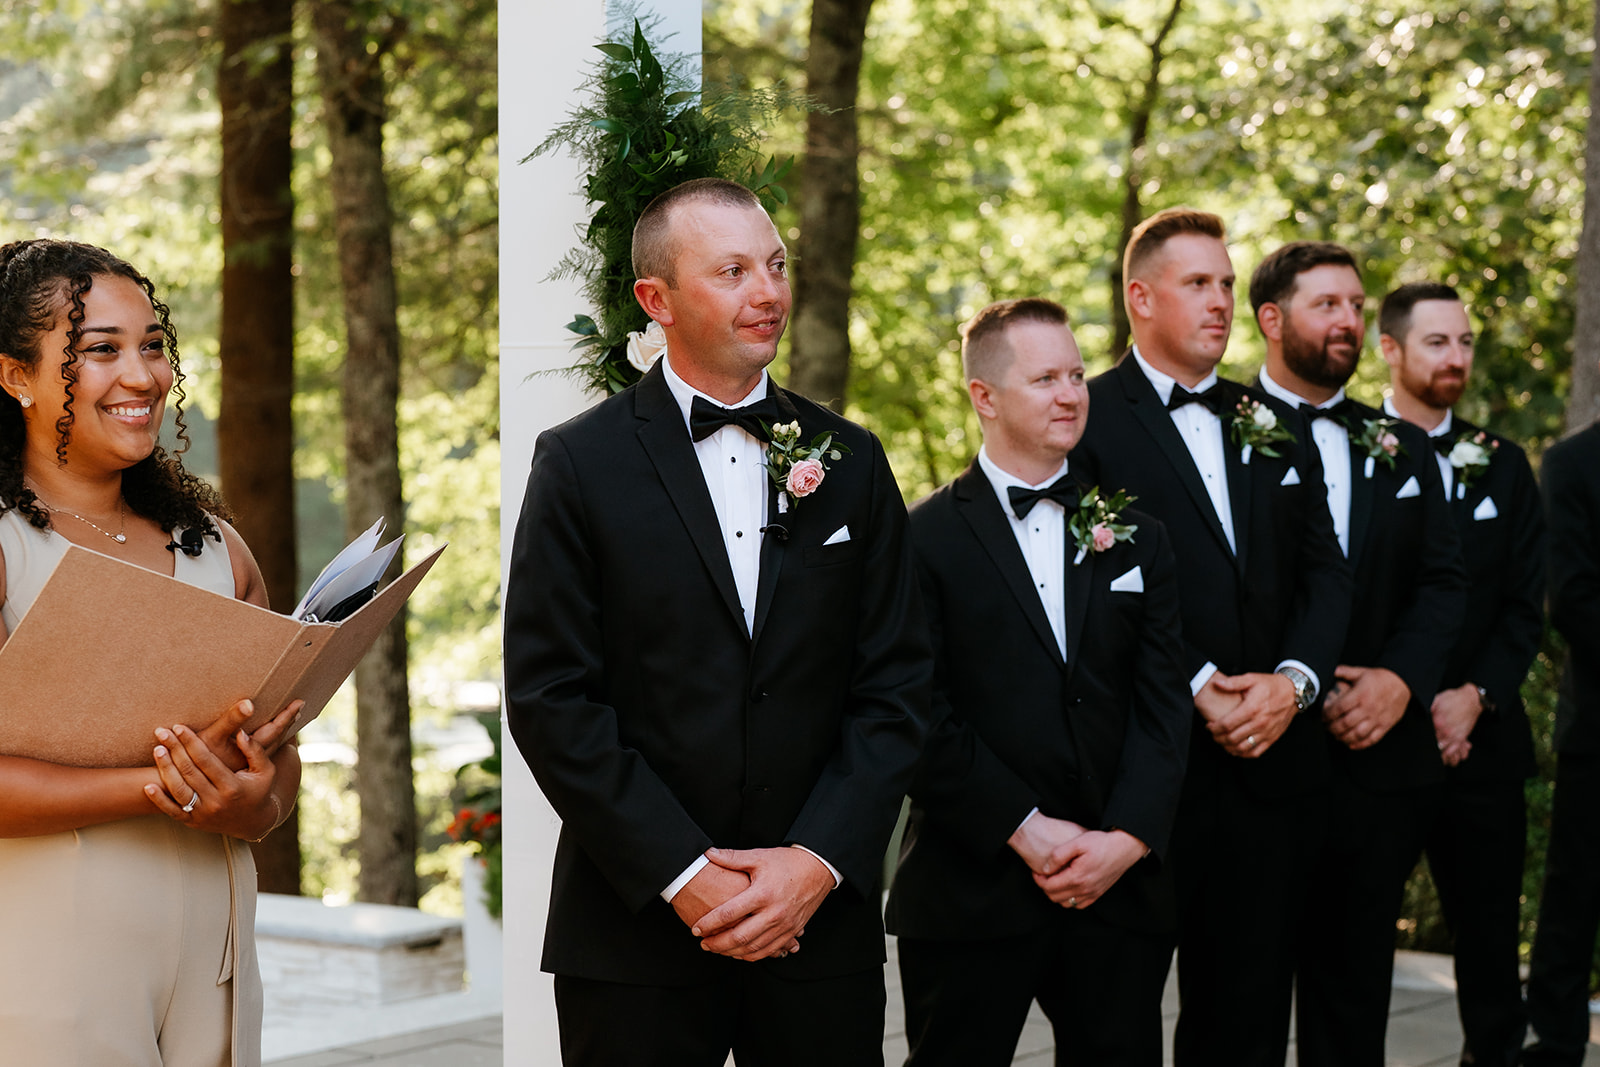 A group of groomsmen stands in a line wearing black tuxedos with boutonnieres, attentively watching an event, alongside a woman holding a folder, possibly officiating or coordinating,.